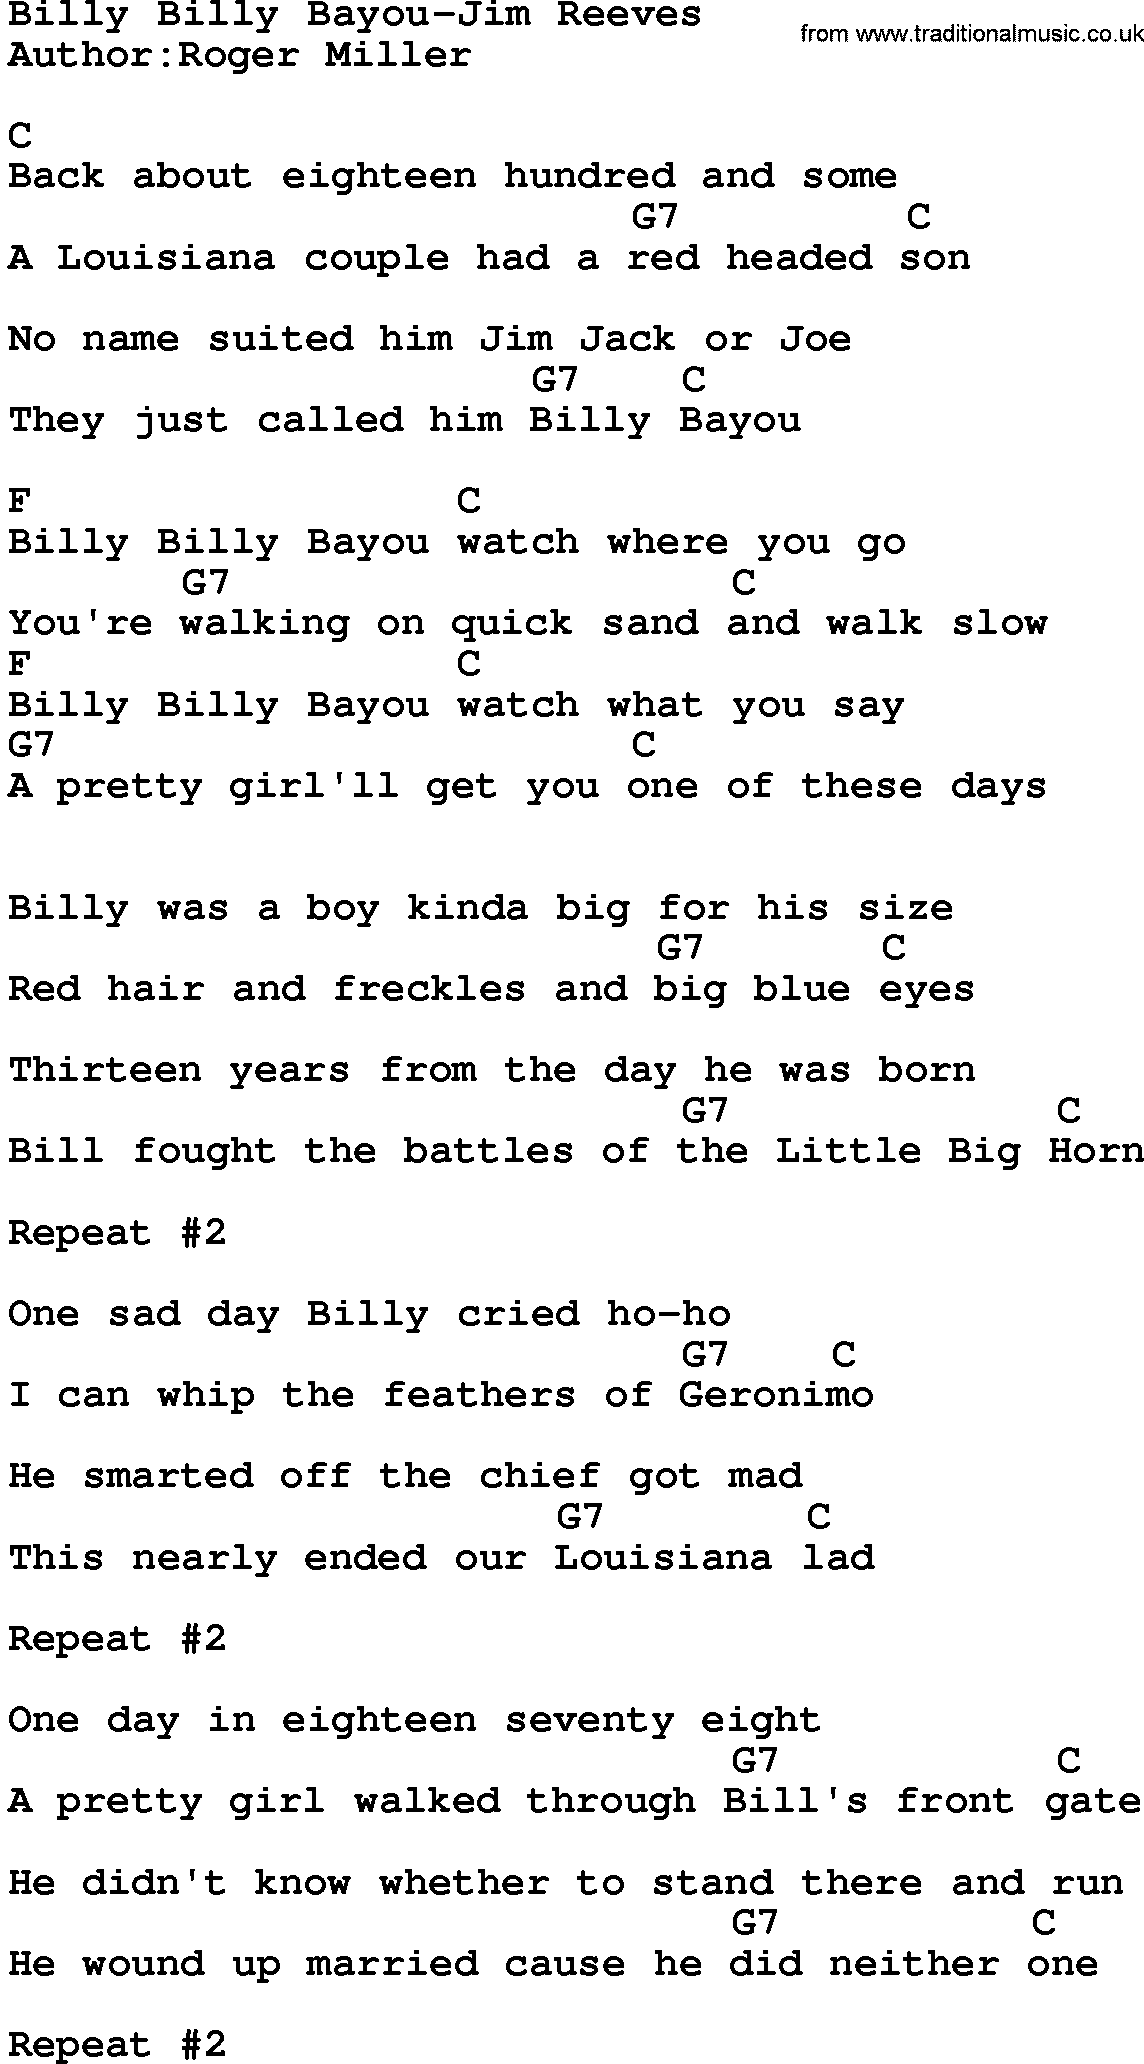 Country music song: Billy Billy Bayou-Jim Reeves lyrics and chords